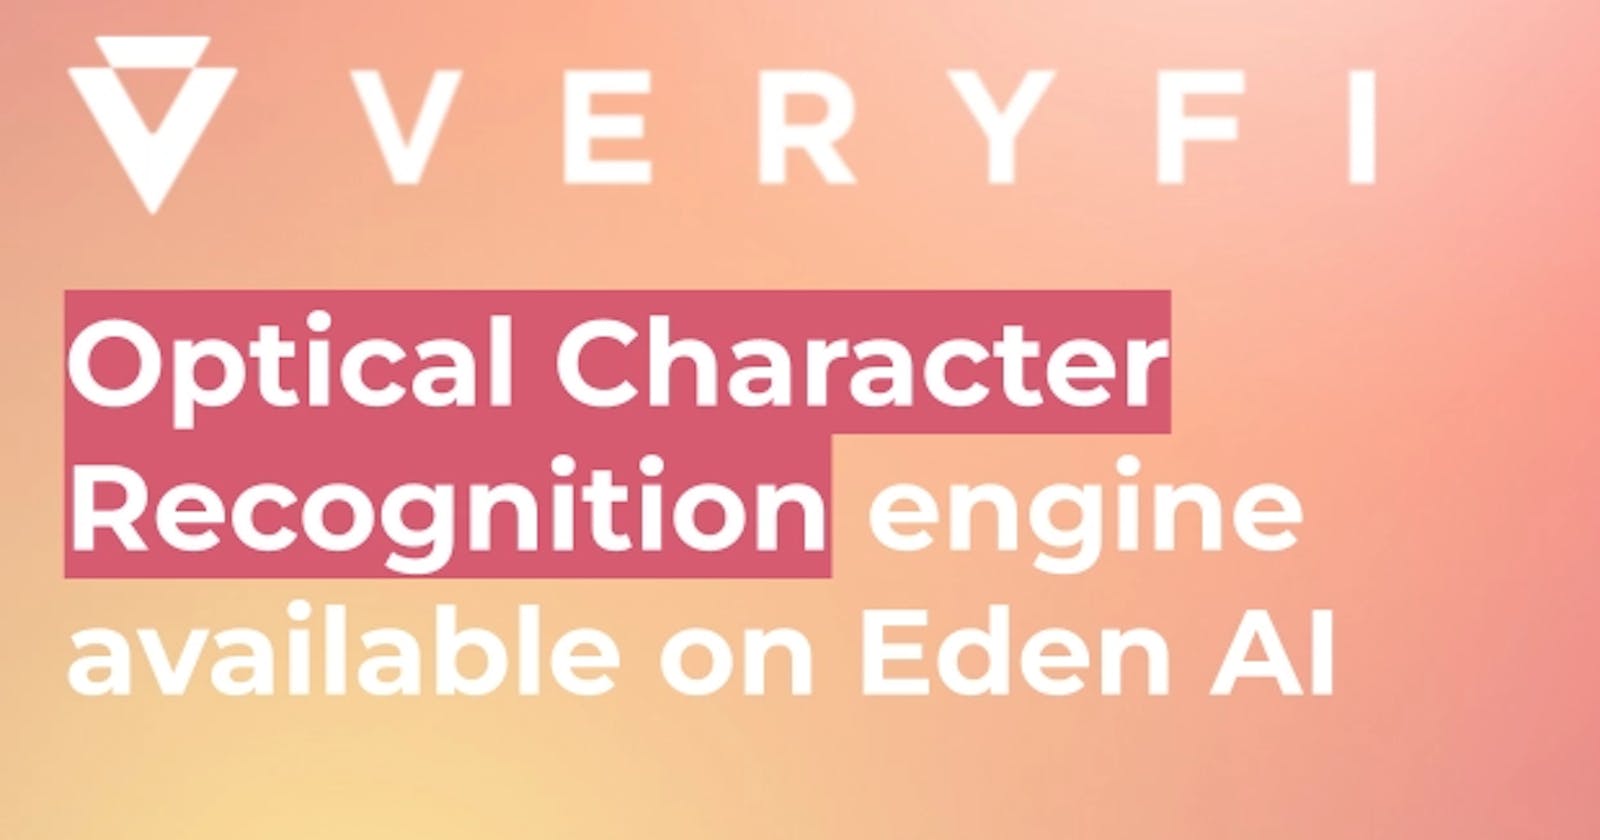 Veryfi OCR engine is available on Eden AI